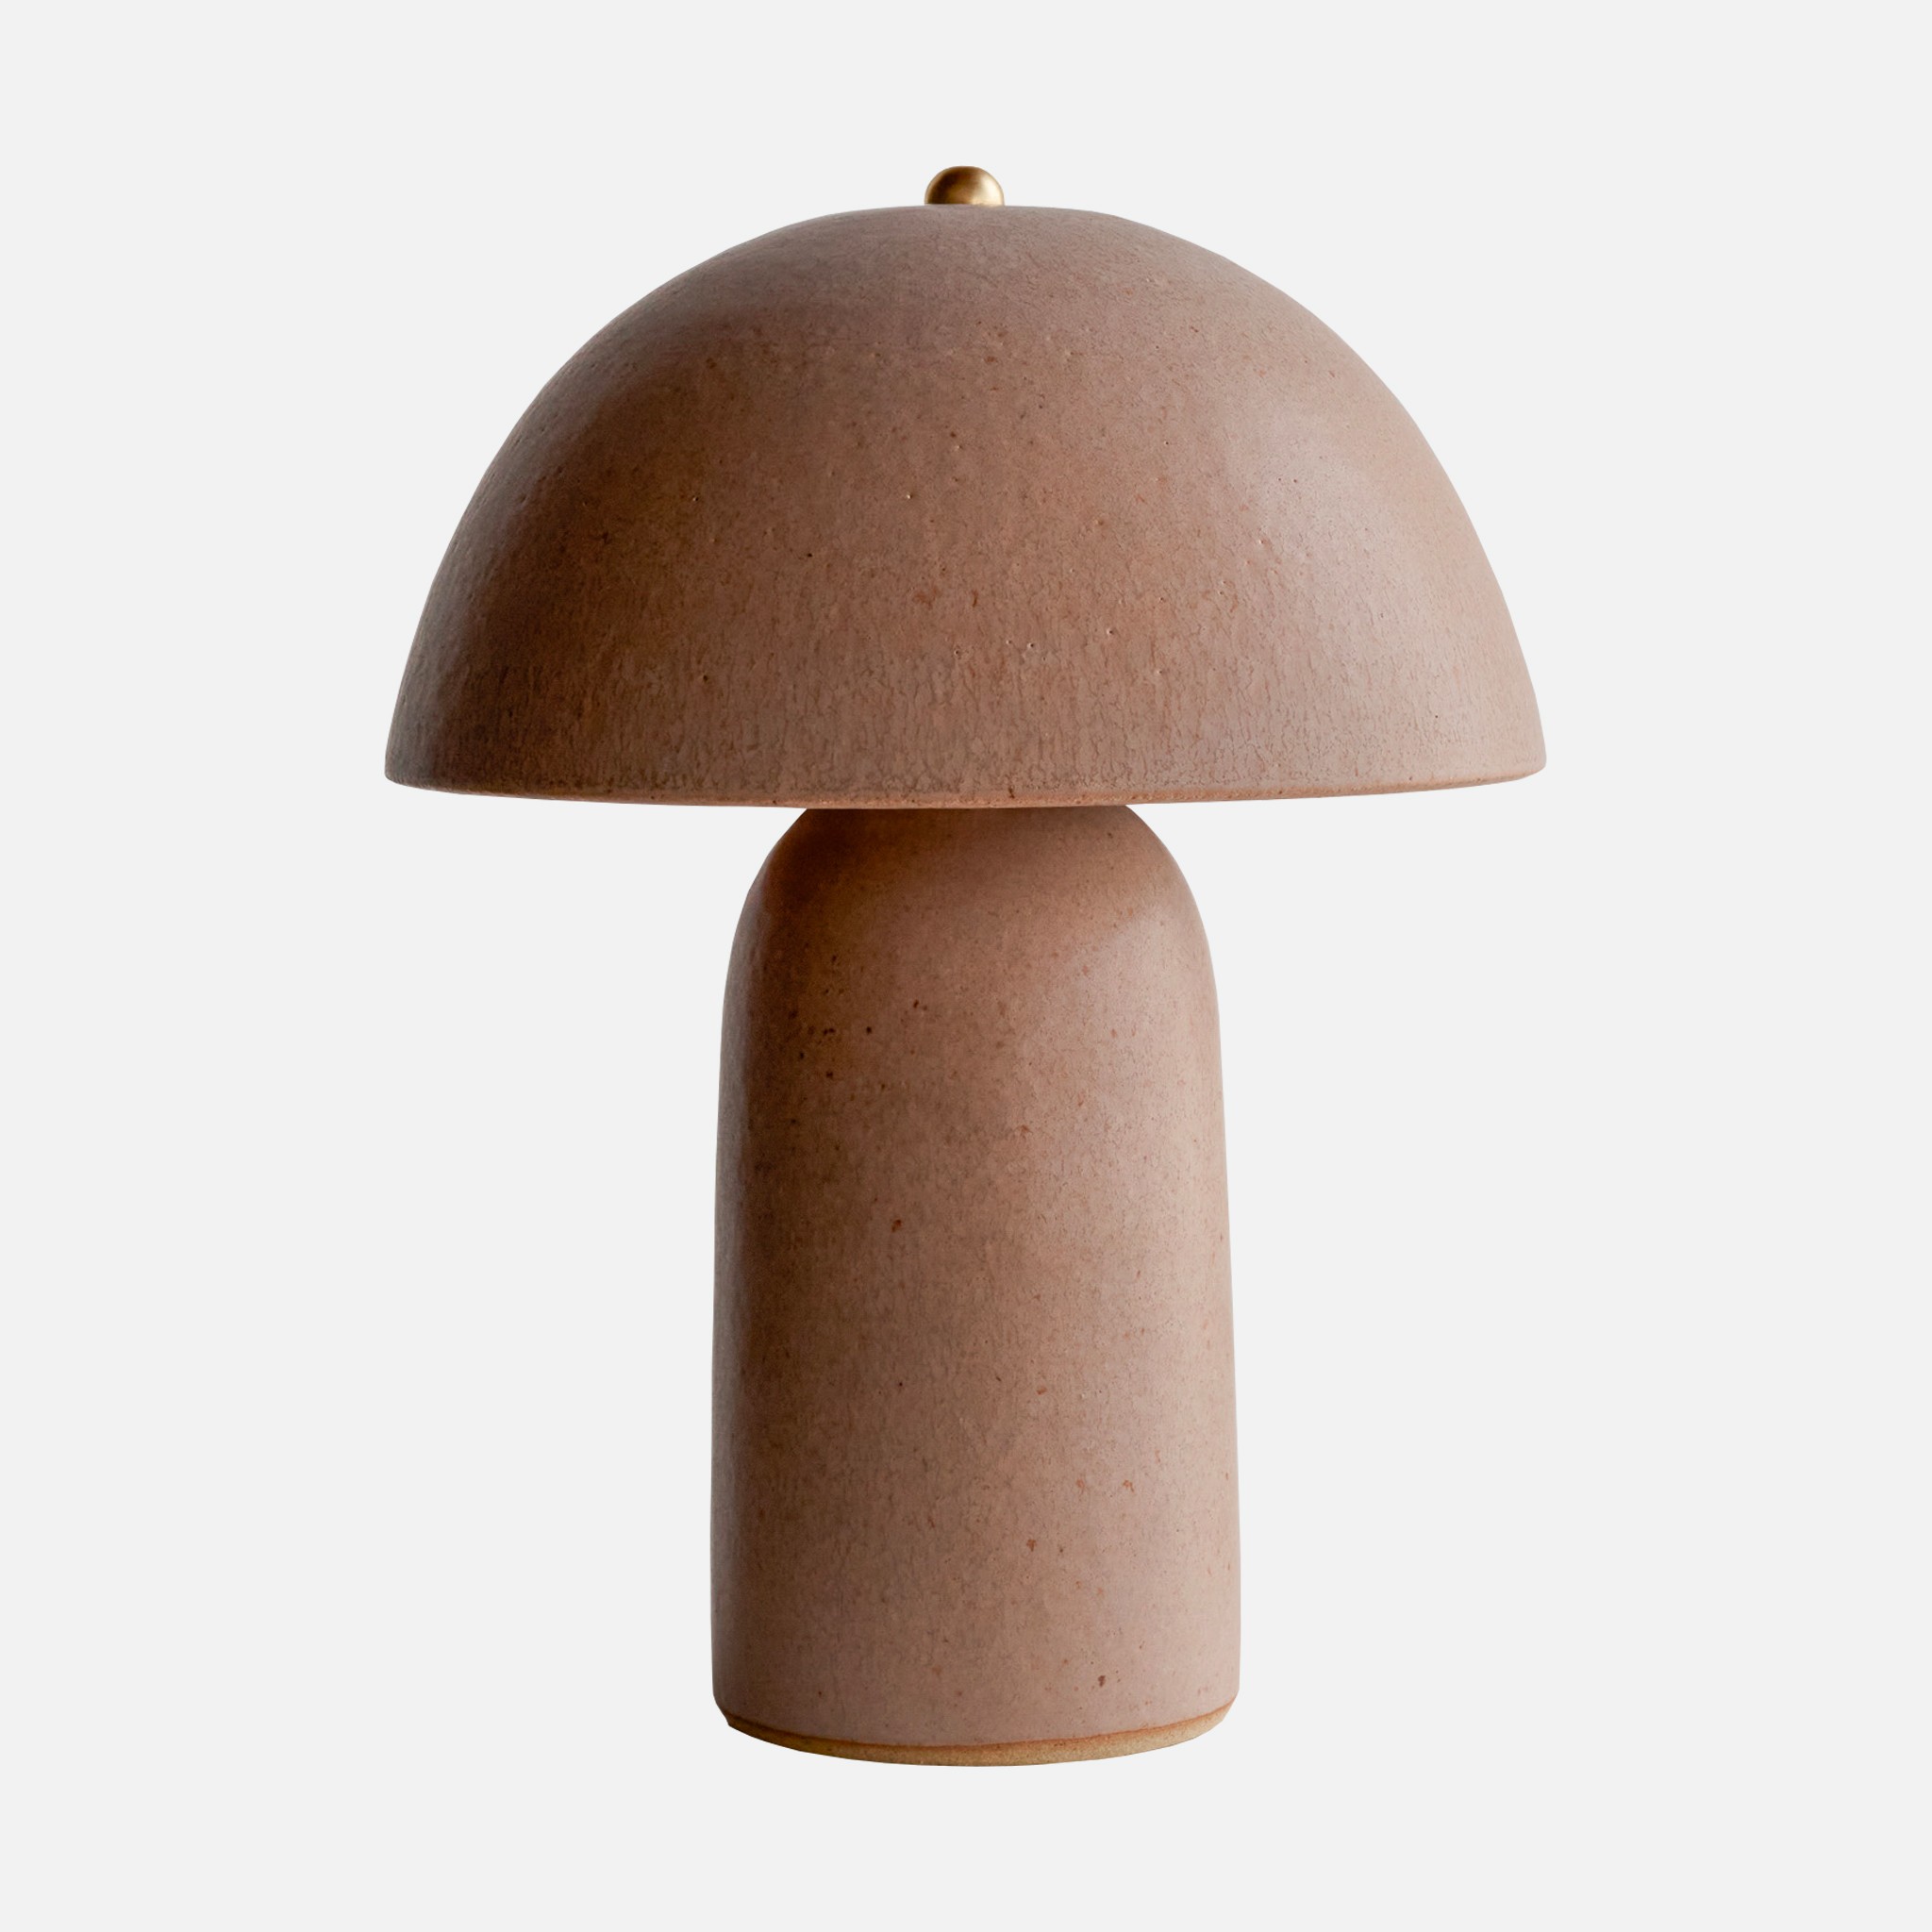 a mushroom shaped lamp is shown against a white background